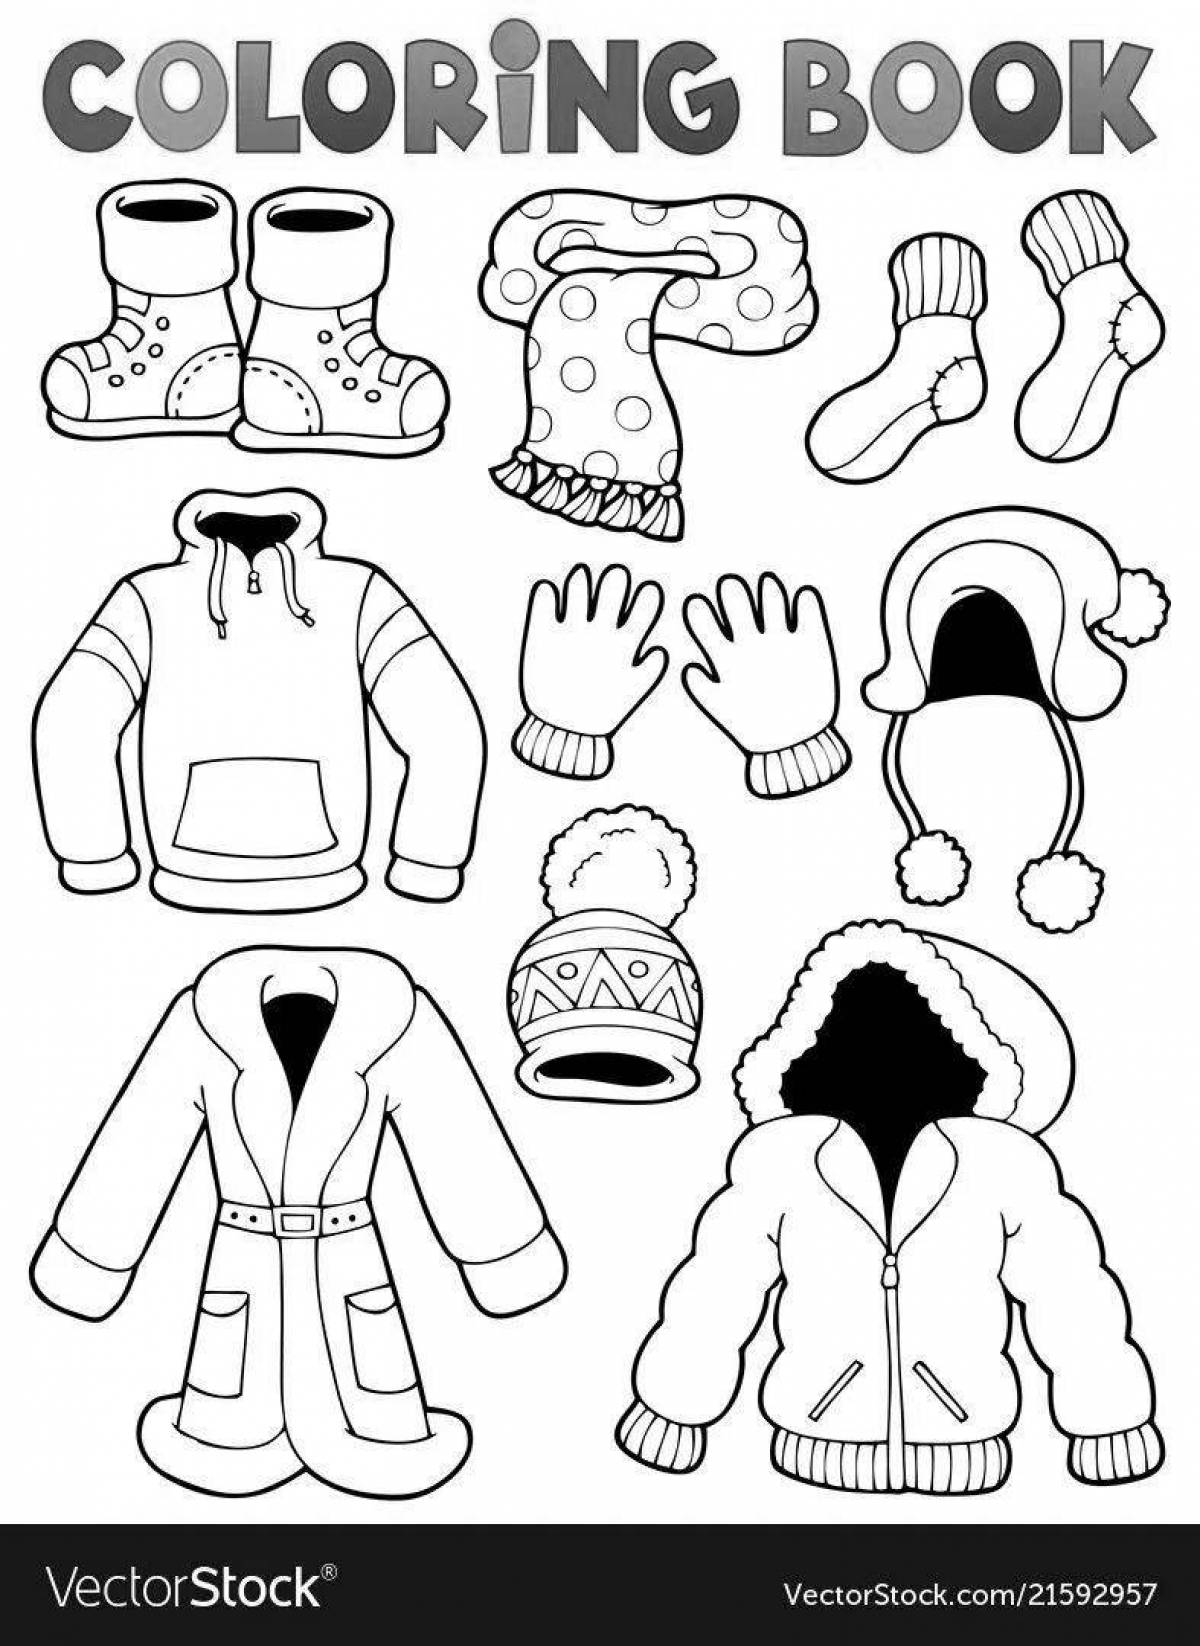 Coloring book cute winter clothes for children 5-6 years old